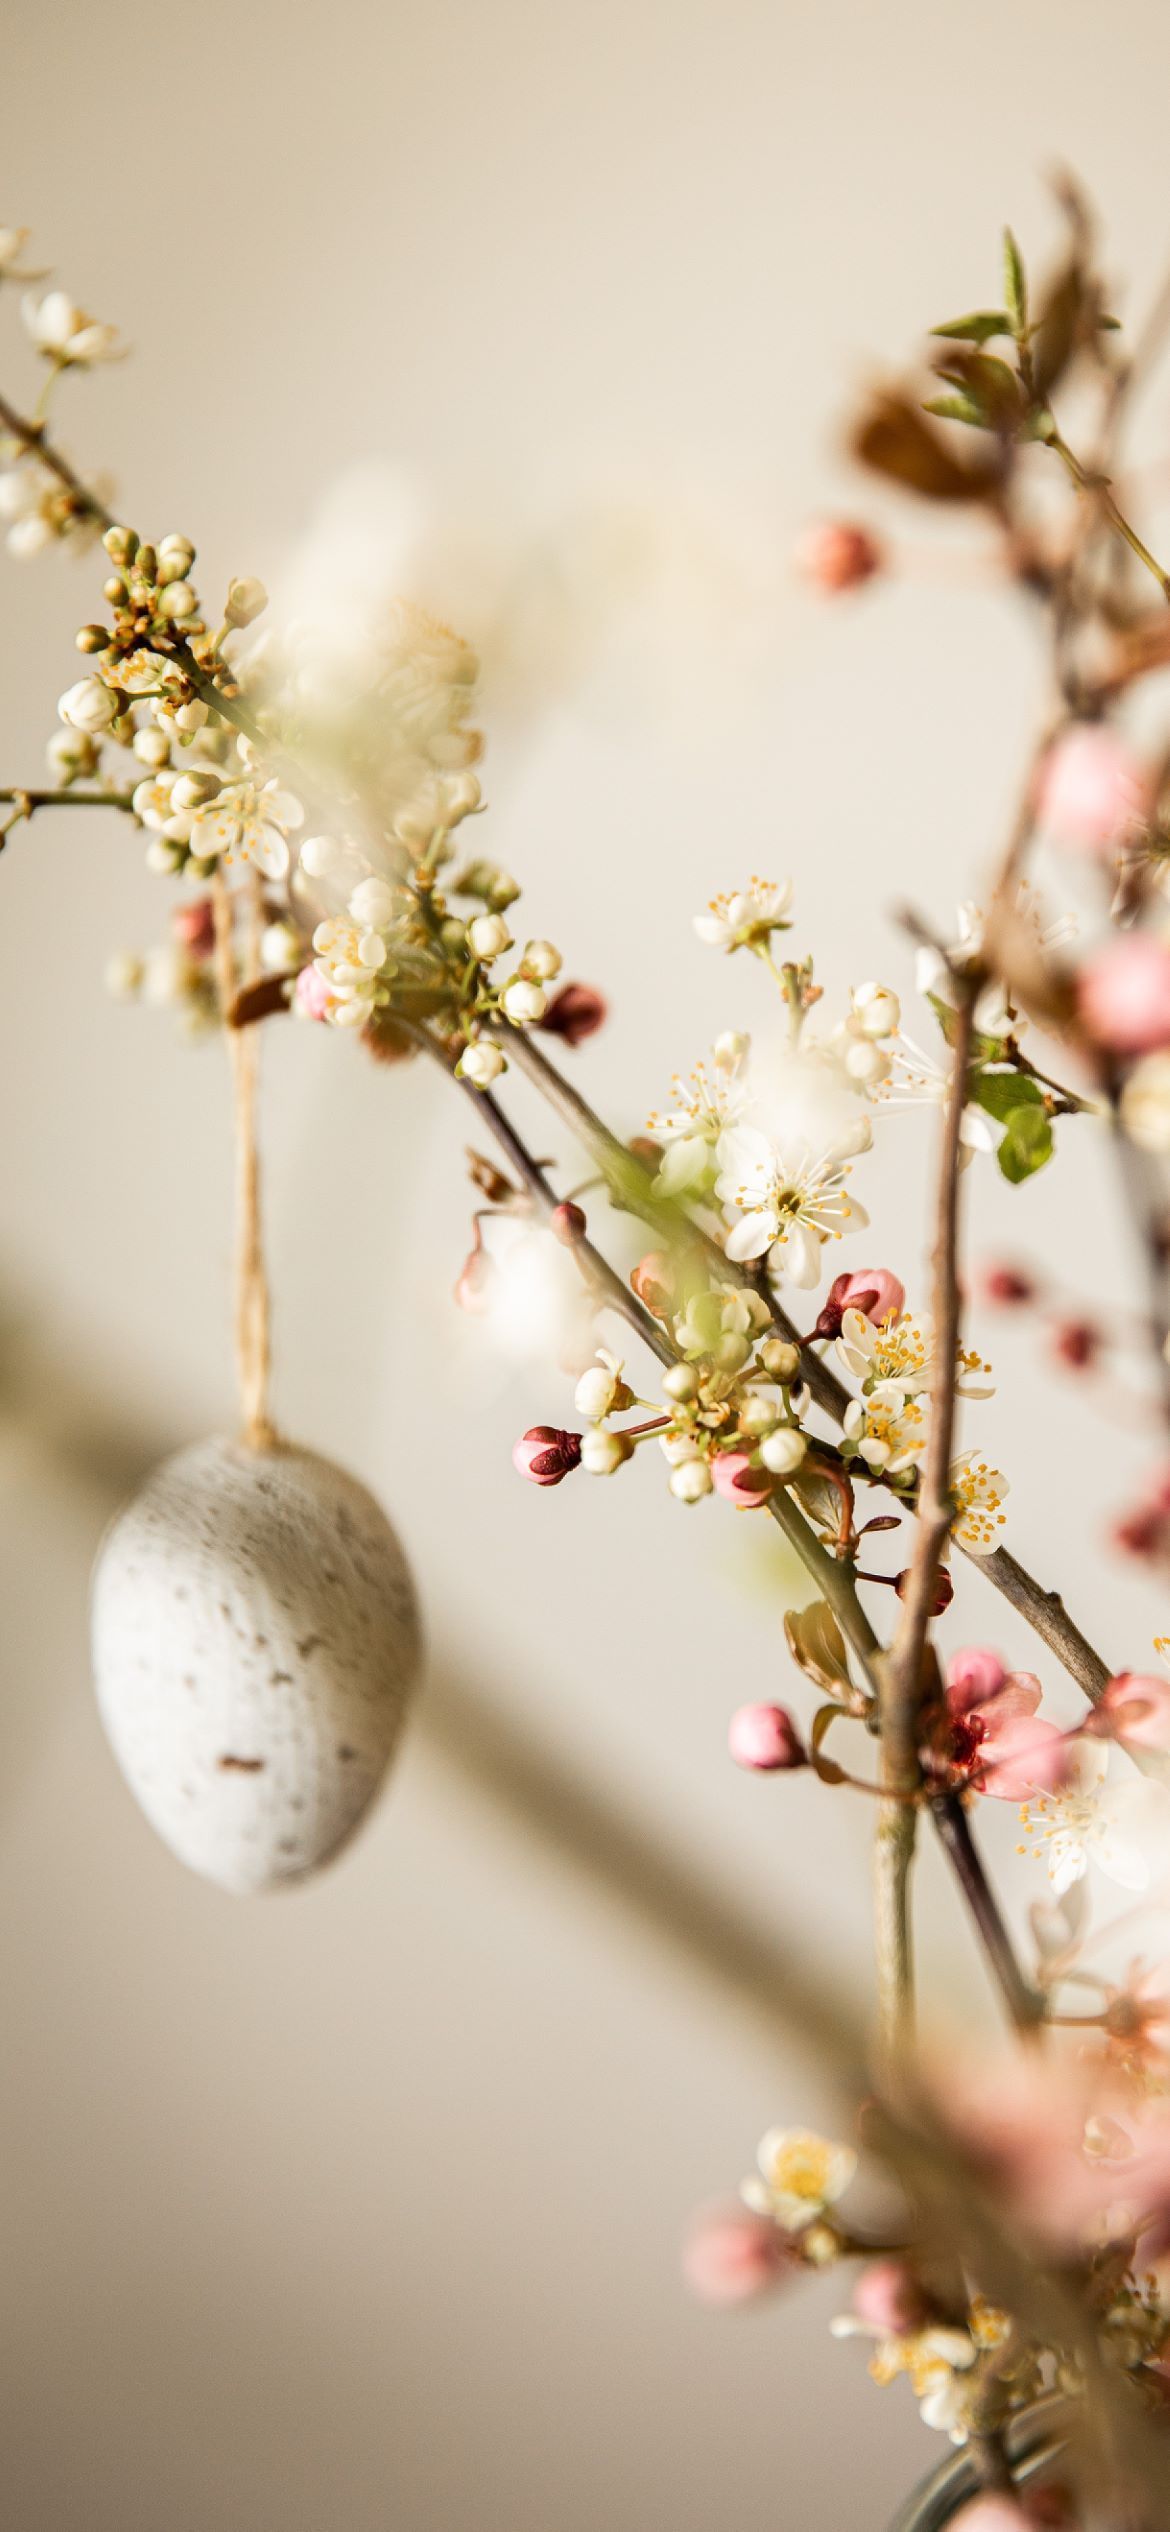 A white Easter egg hanging from a branch with pink flowers. - Easter